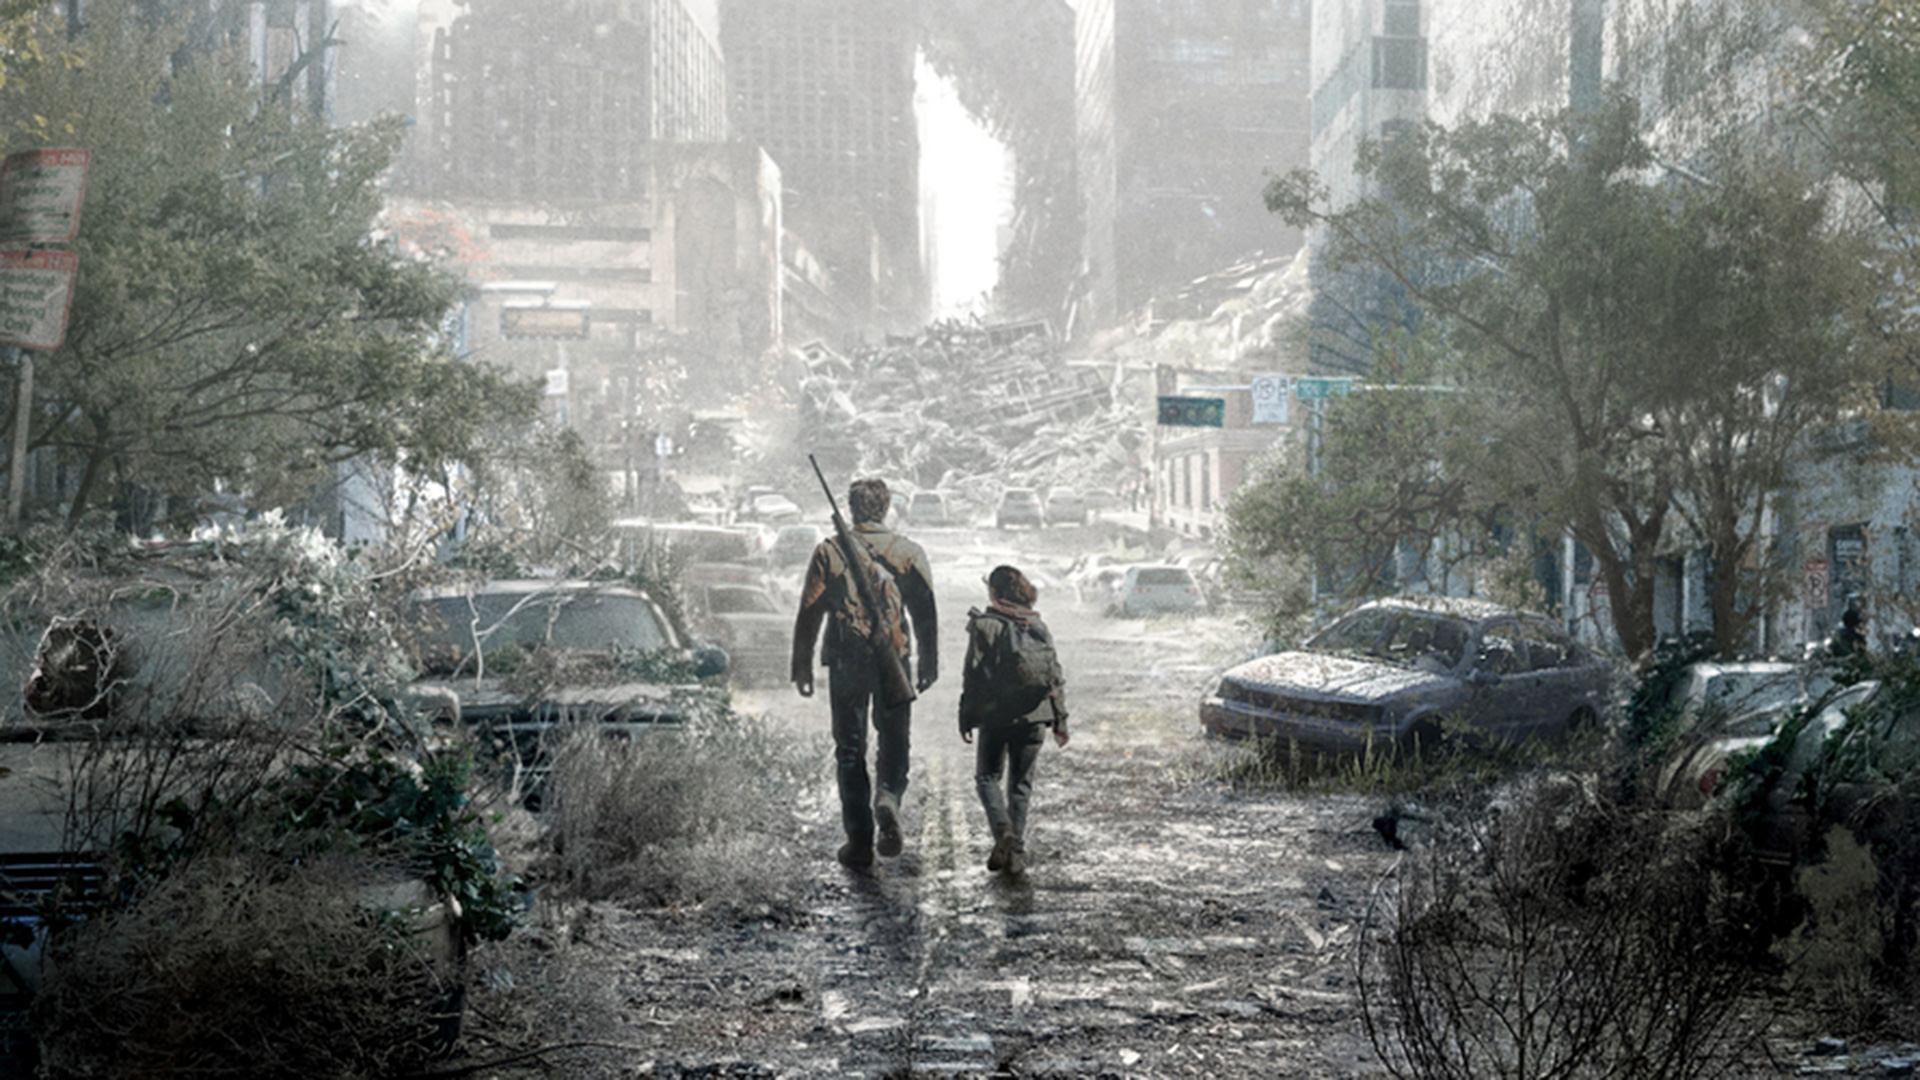 The Last of Us City 2023 Wallpaper, HD TV Series 4K Wallpapers, Images and  Background - Wallpapers Den